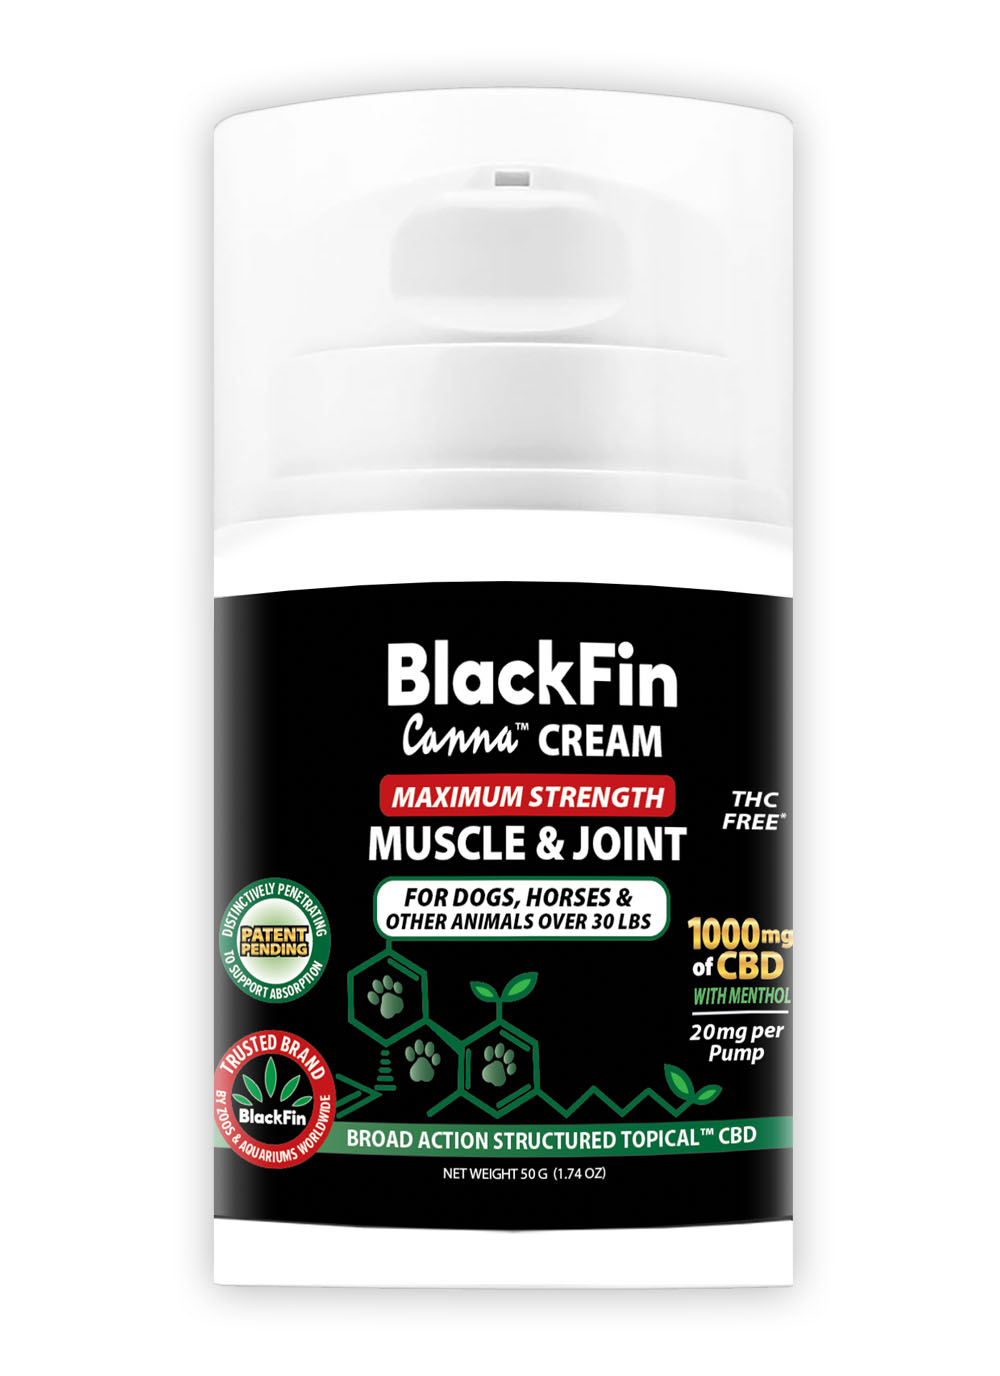 BlackFin Canna Cream Maximum Strength Muscle and Joint - 1000mg of CBD